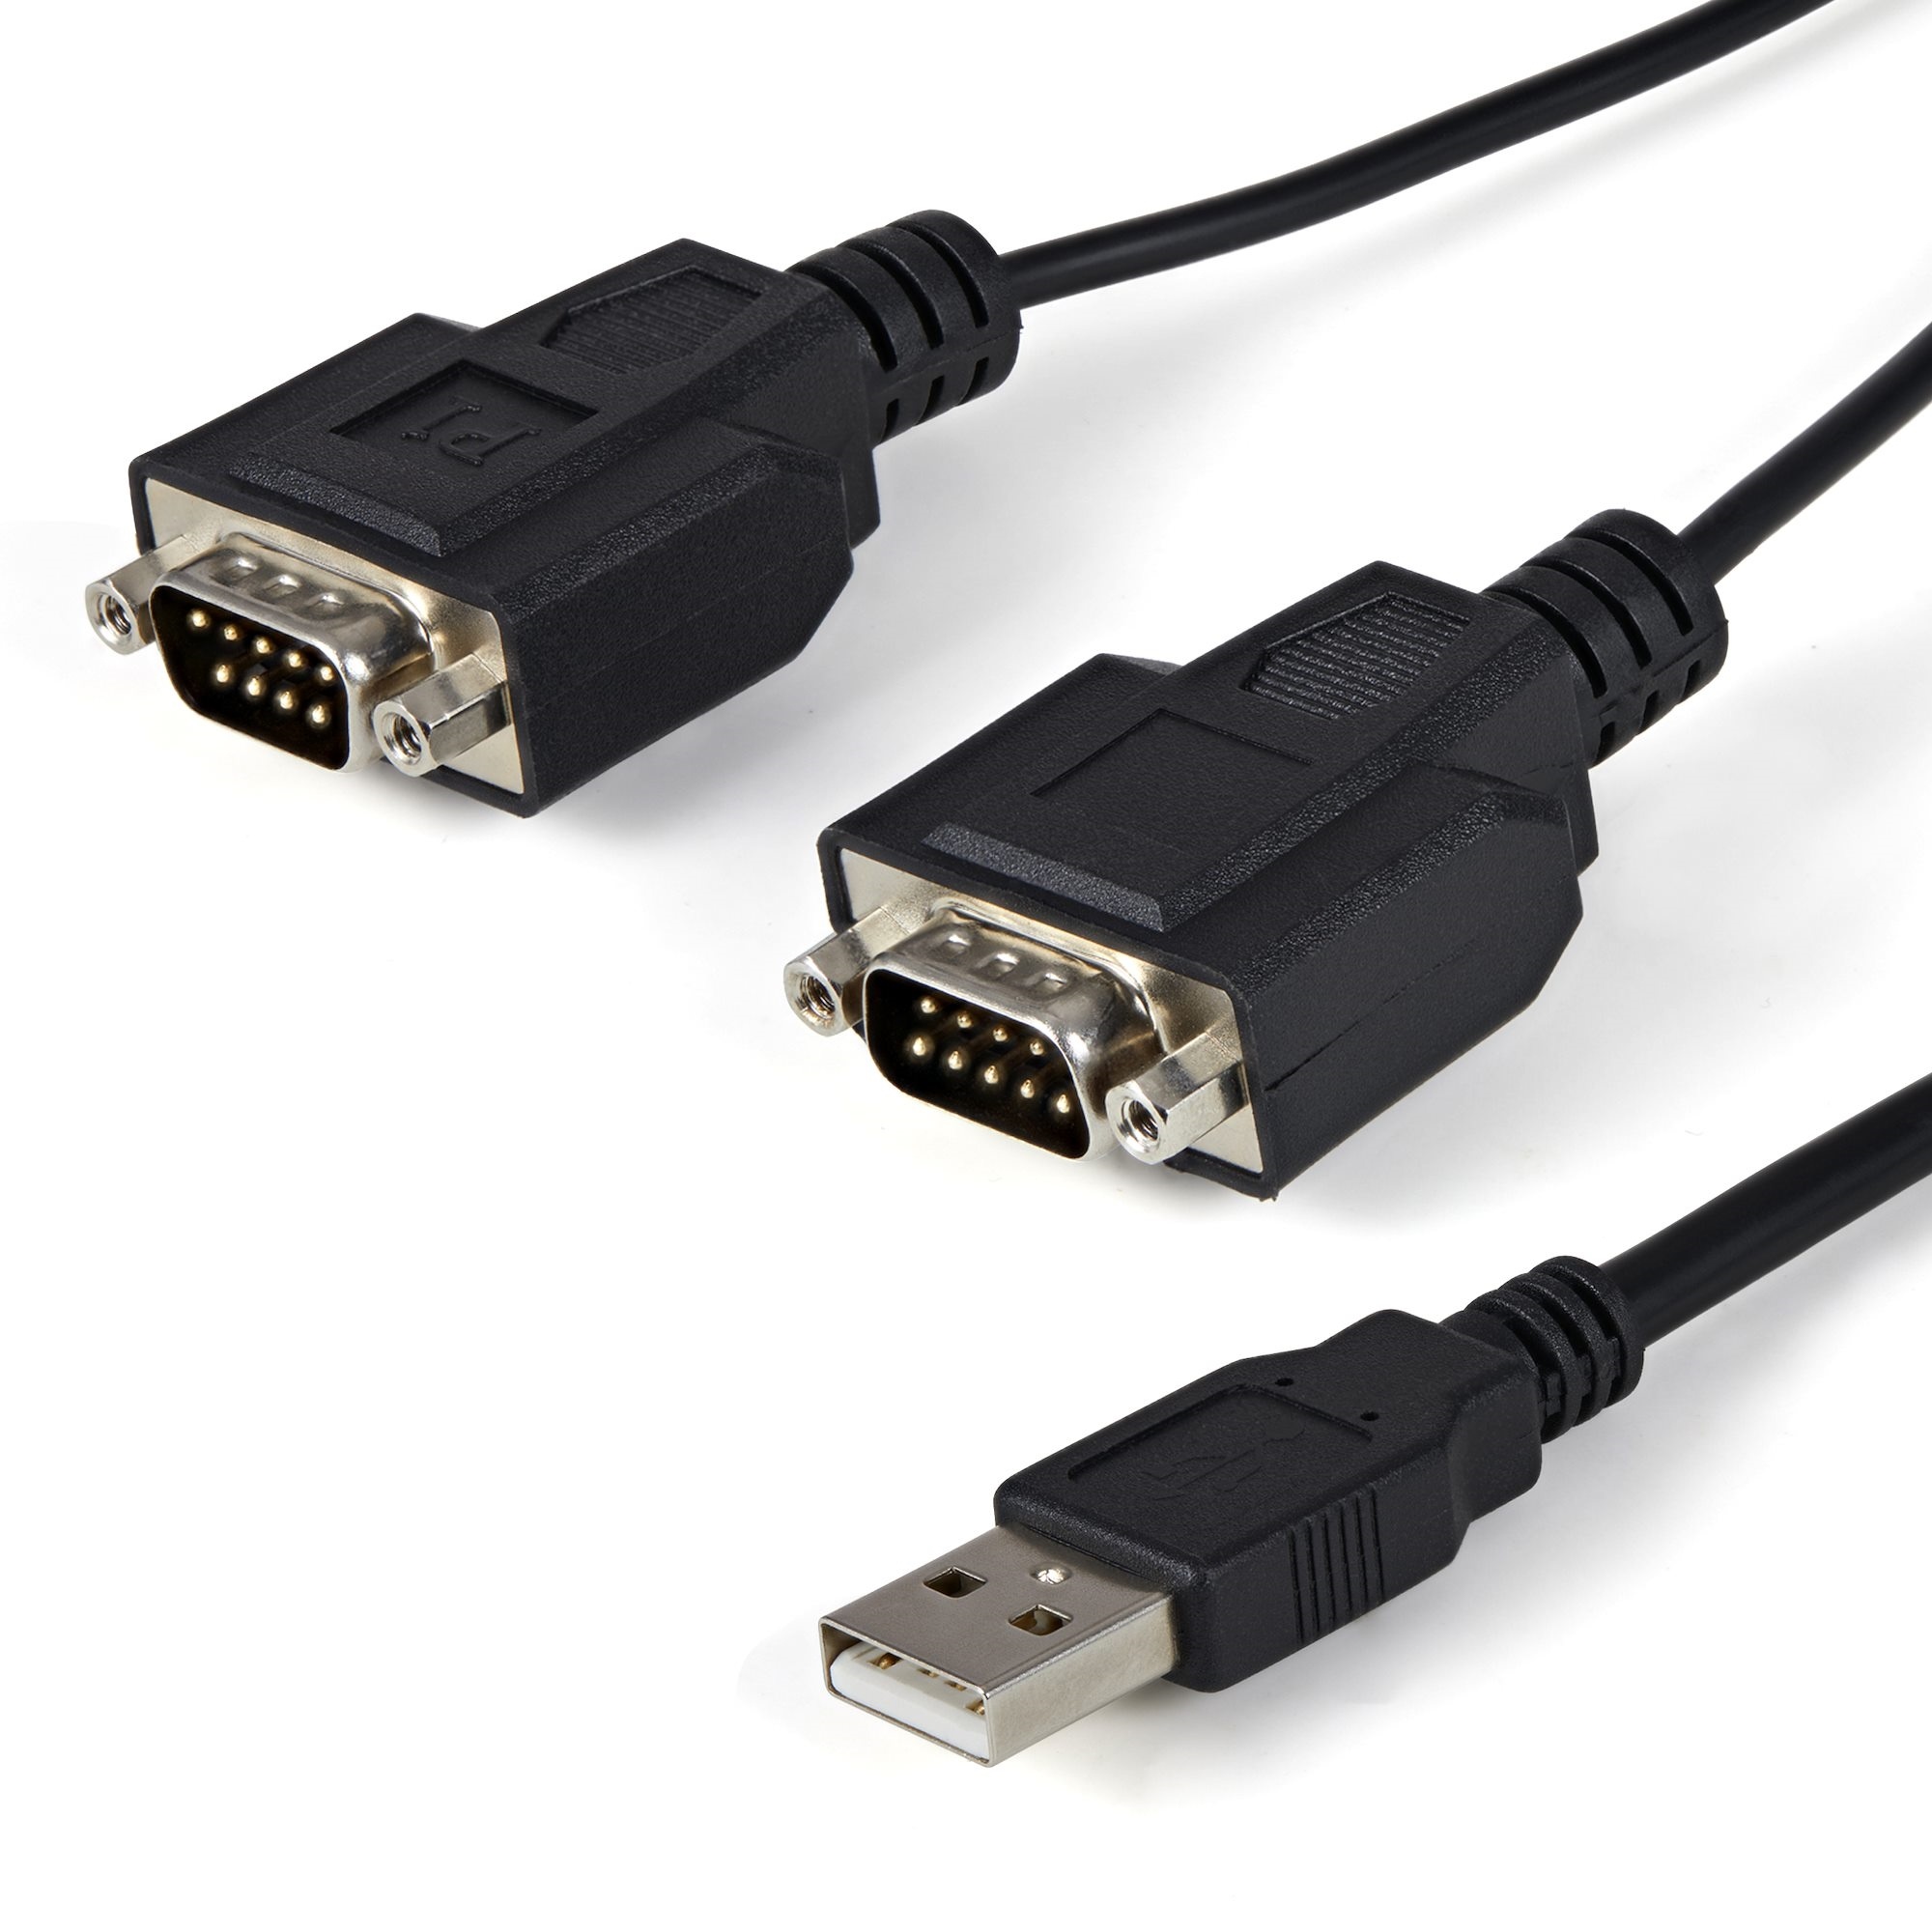 StarTech 2 Port FTDI USB to Serial RS232 Adapter Cable with COM Retention (1.8m)